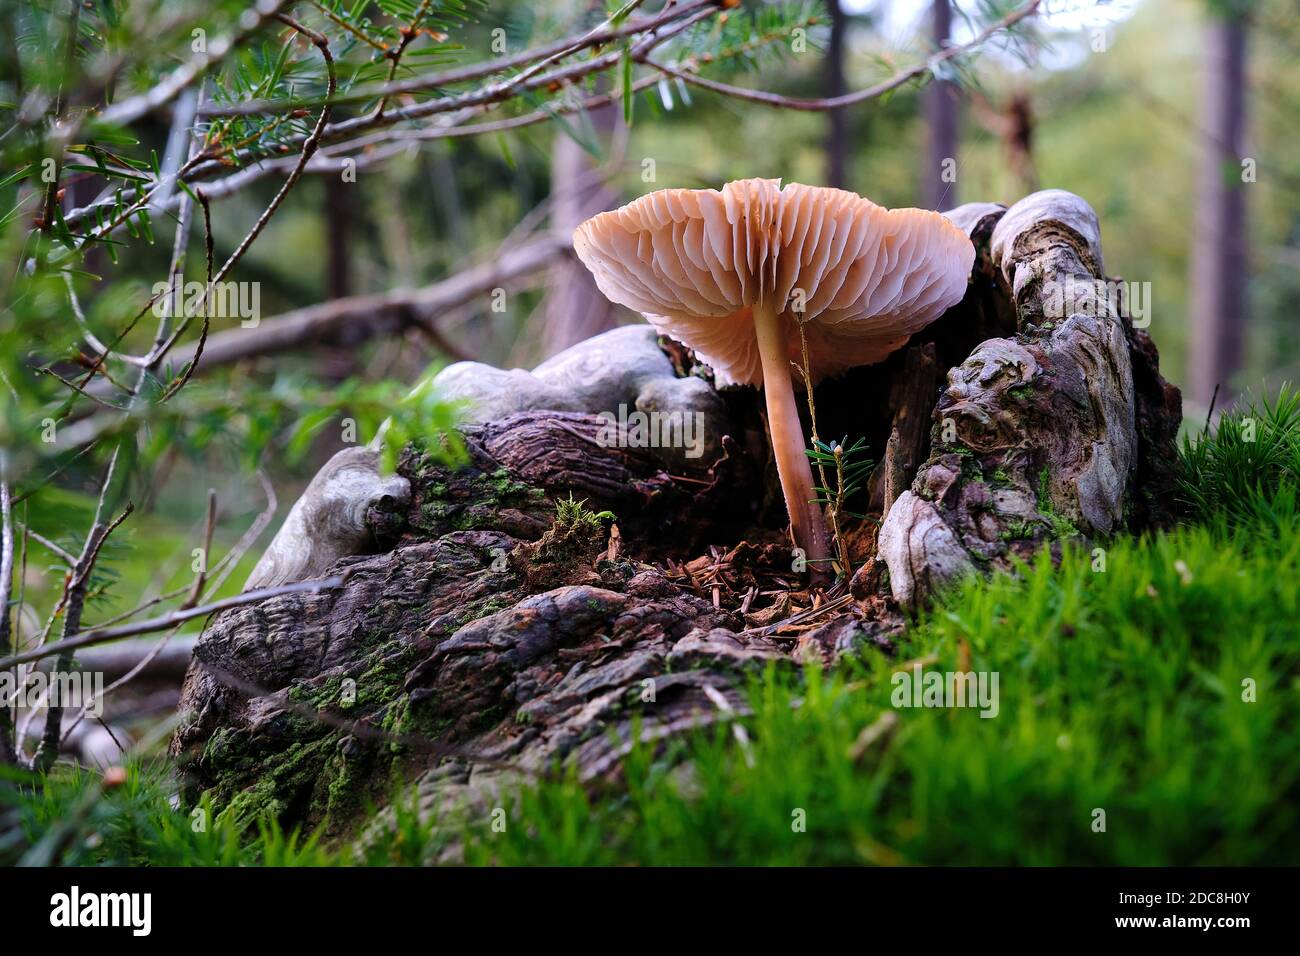 Autumn scene close up of a mushroom in an old stump, tree trunk on the forest floor with green moss and autumn leaves. Oct. 2020 Amersfoort, the Stock Photo